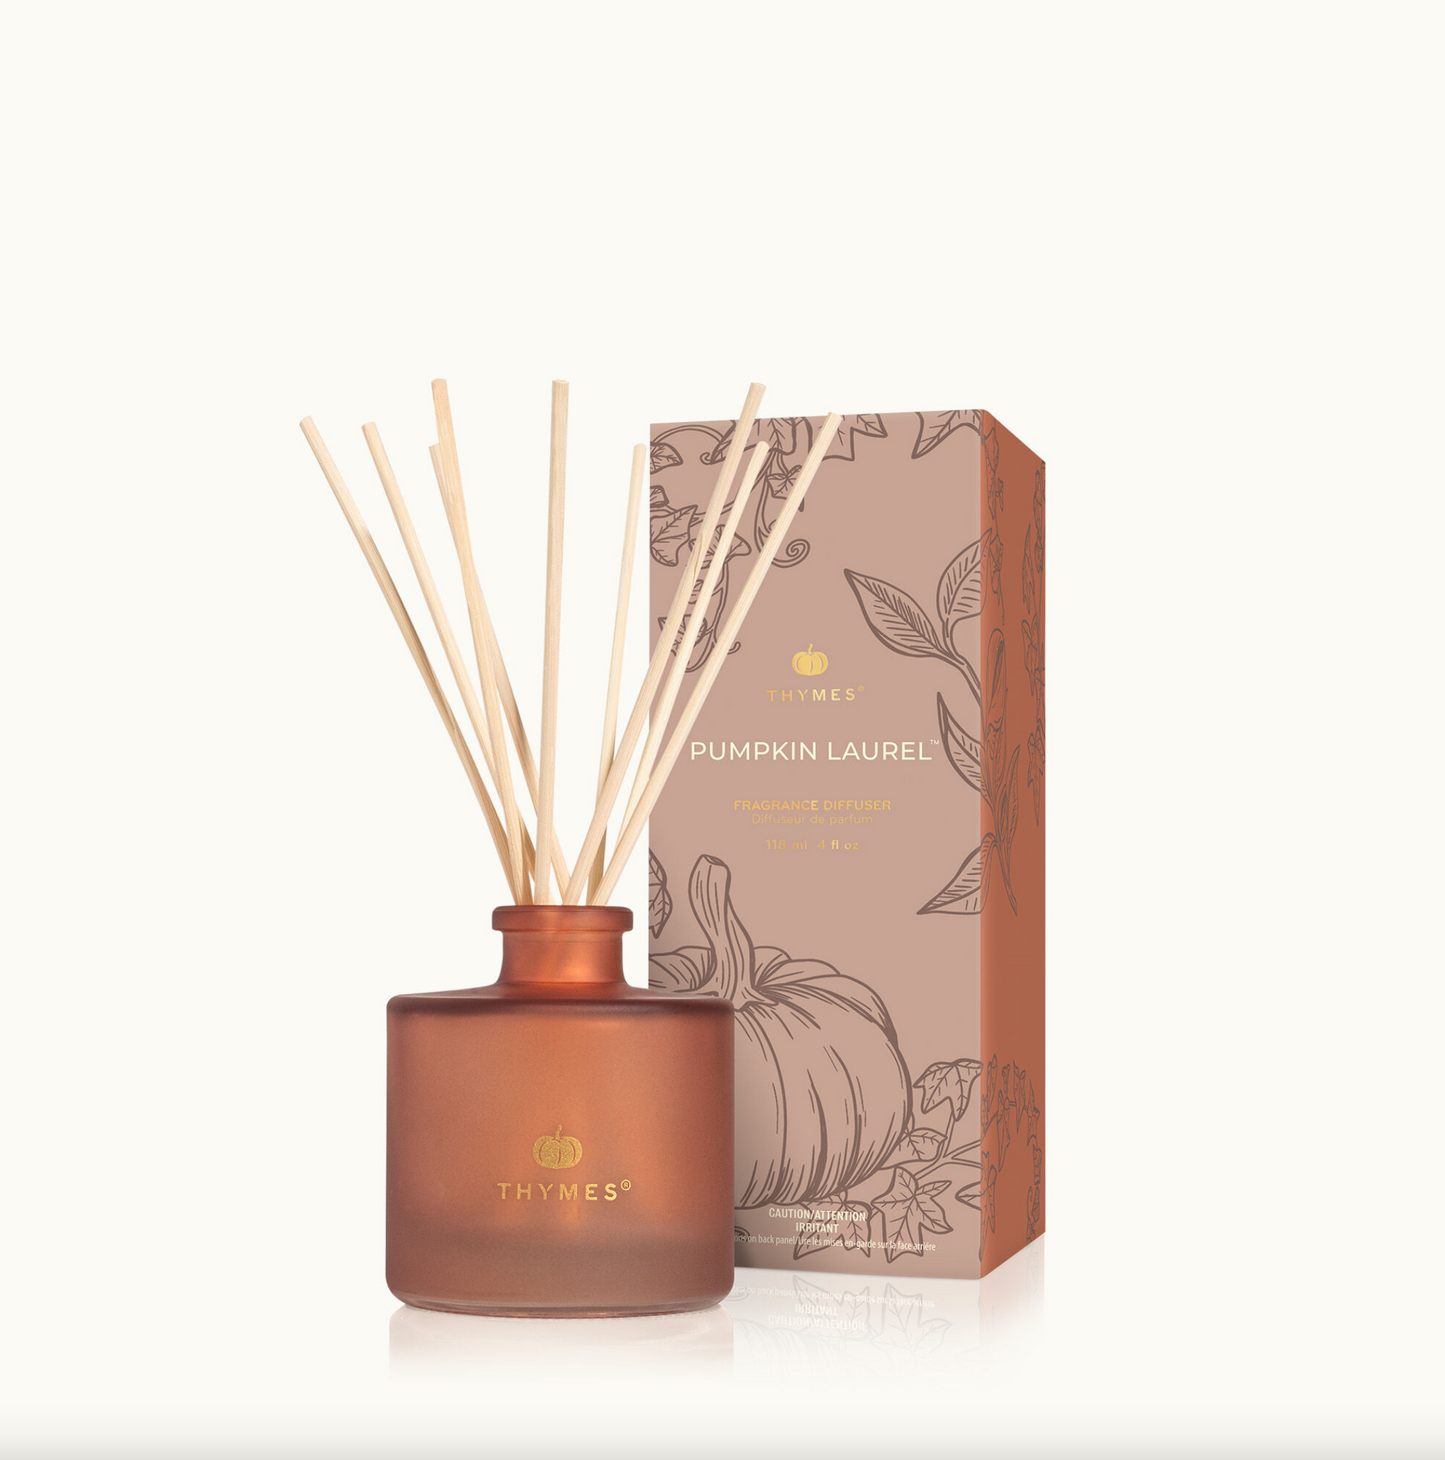 Thymes Pumpkin Laurel Petite Reed Diffuser Scents in  at Wrapsody